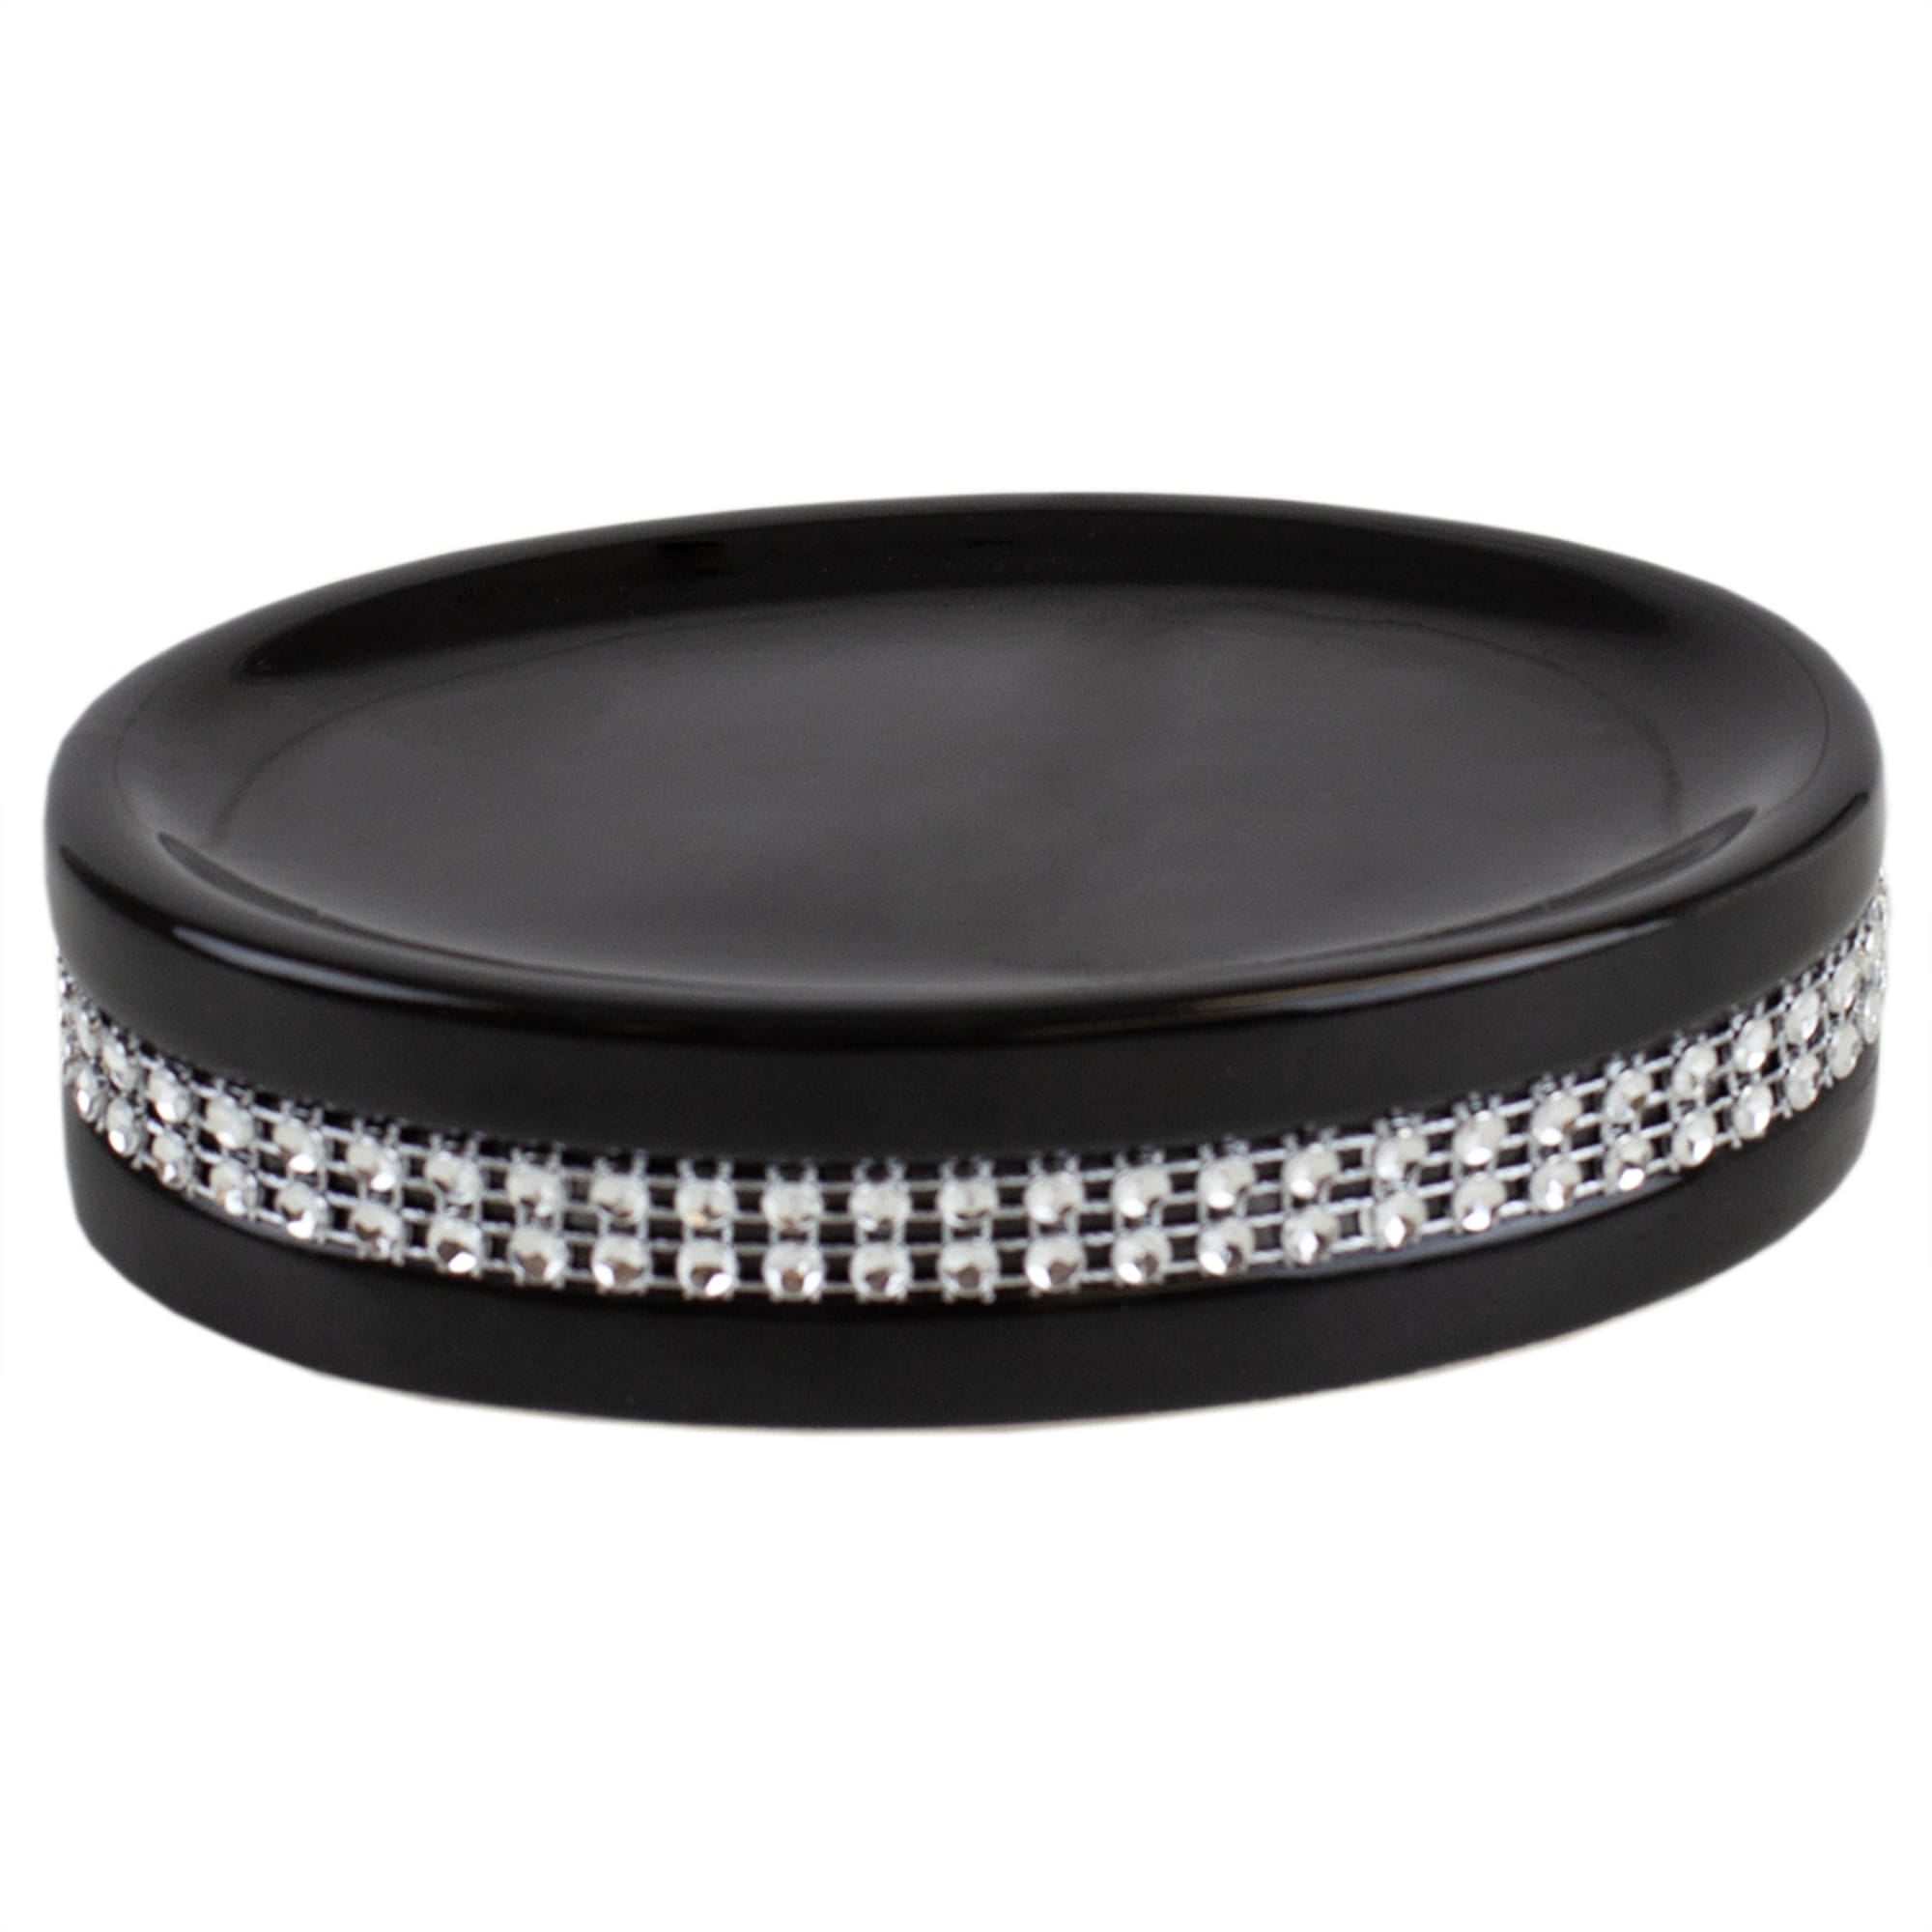 Home Basics 4 Piece Luxury Bath Accessory Set with Stunning Sequin Accents, Black $10.00 EACH, CASE PACK OF 12